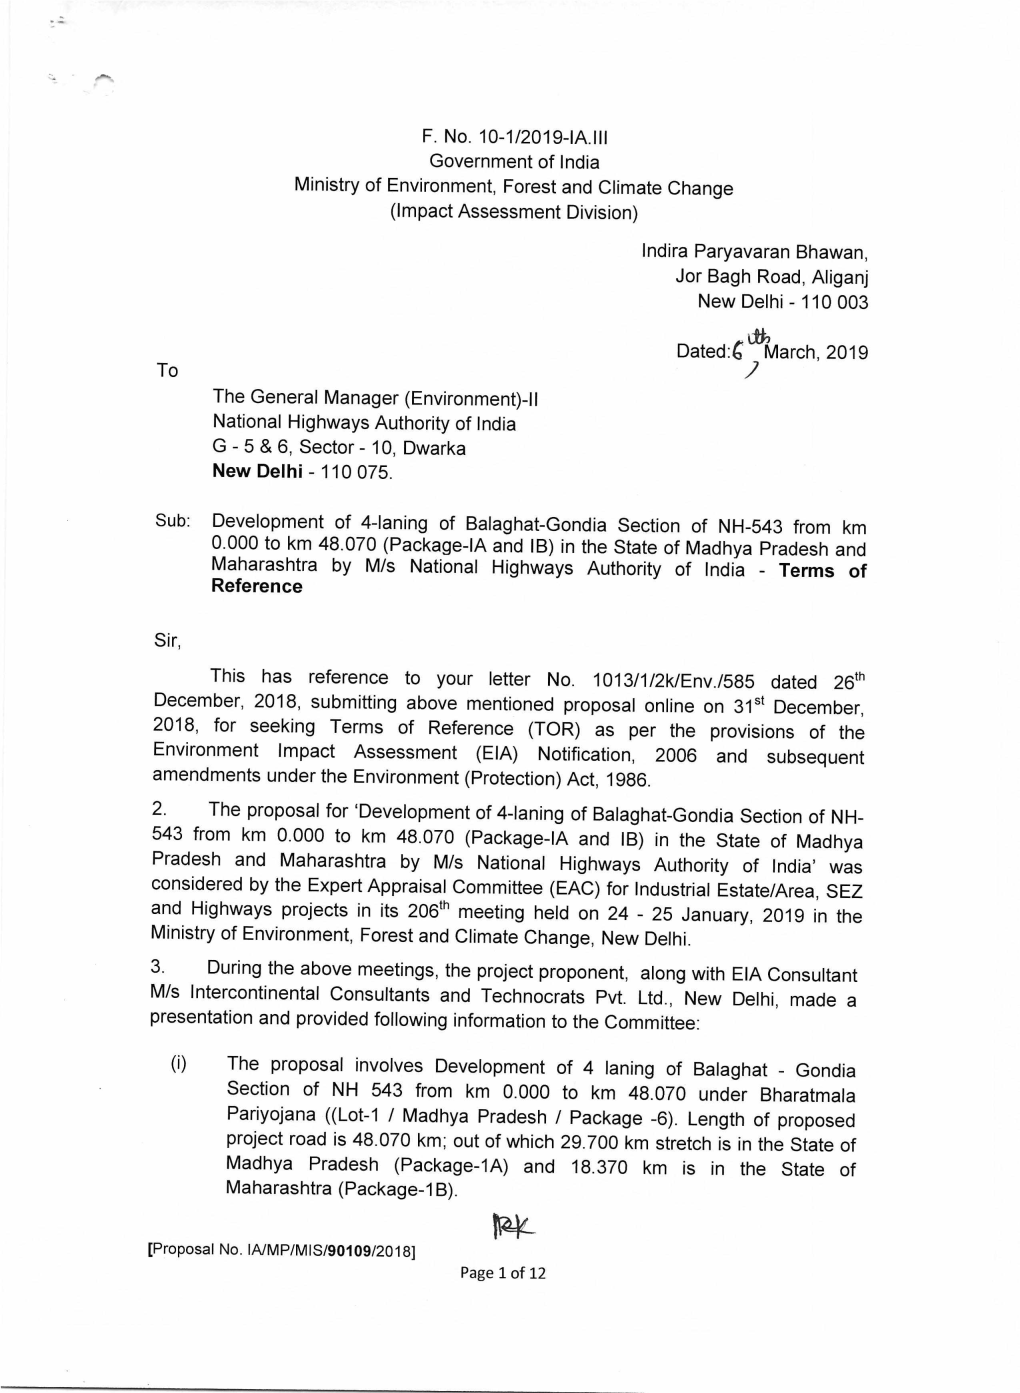 F. No. 10-1/2019-IA.III Government of India Ministry of Environment, Forest and Climate Change (Impact Assessment Division)